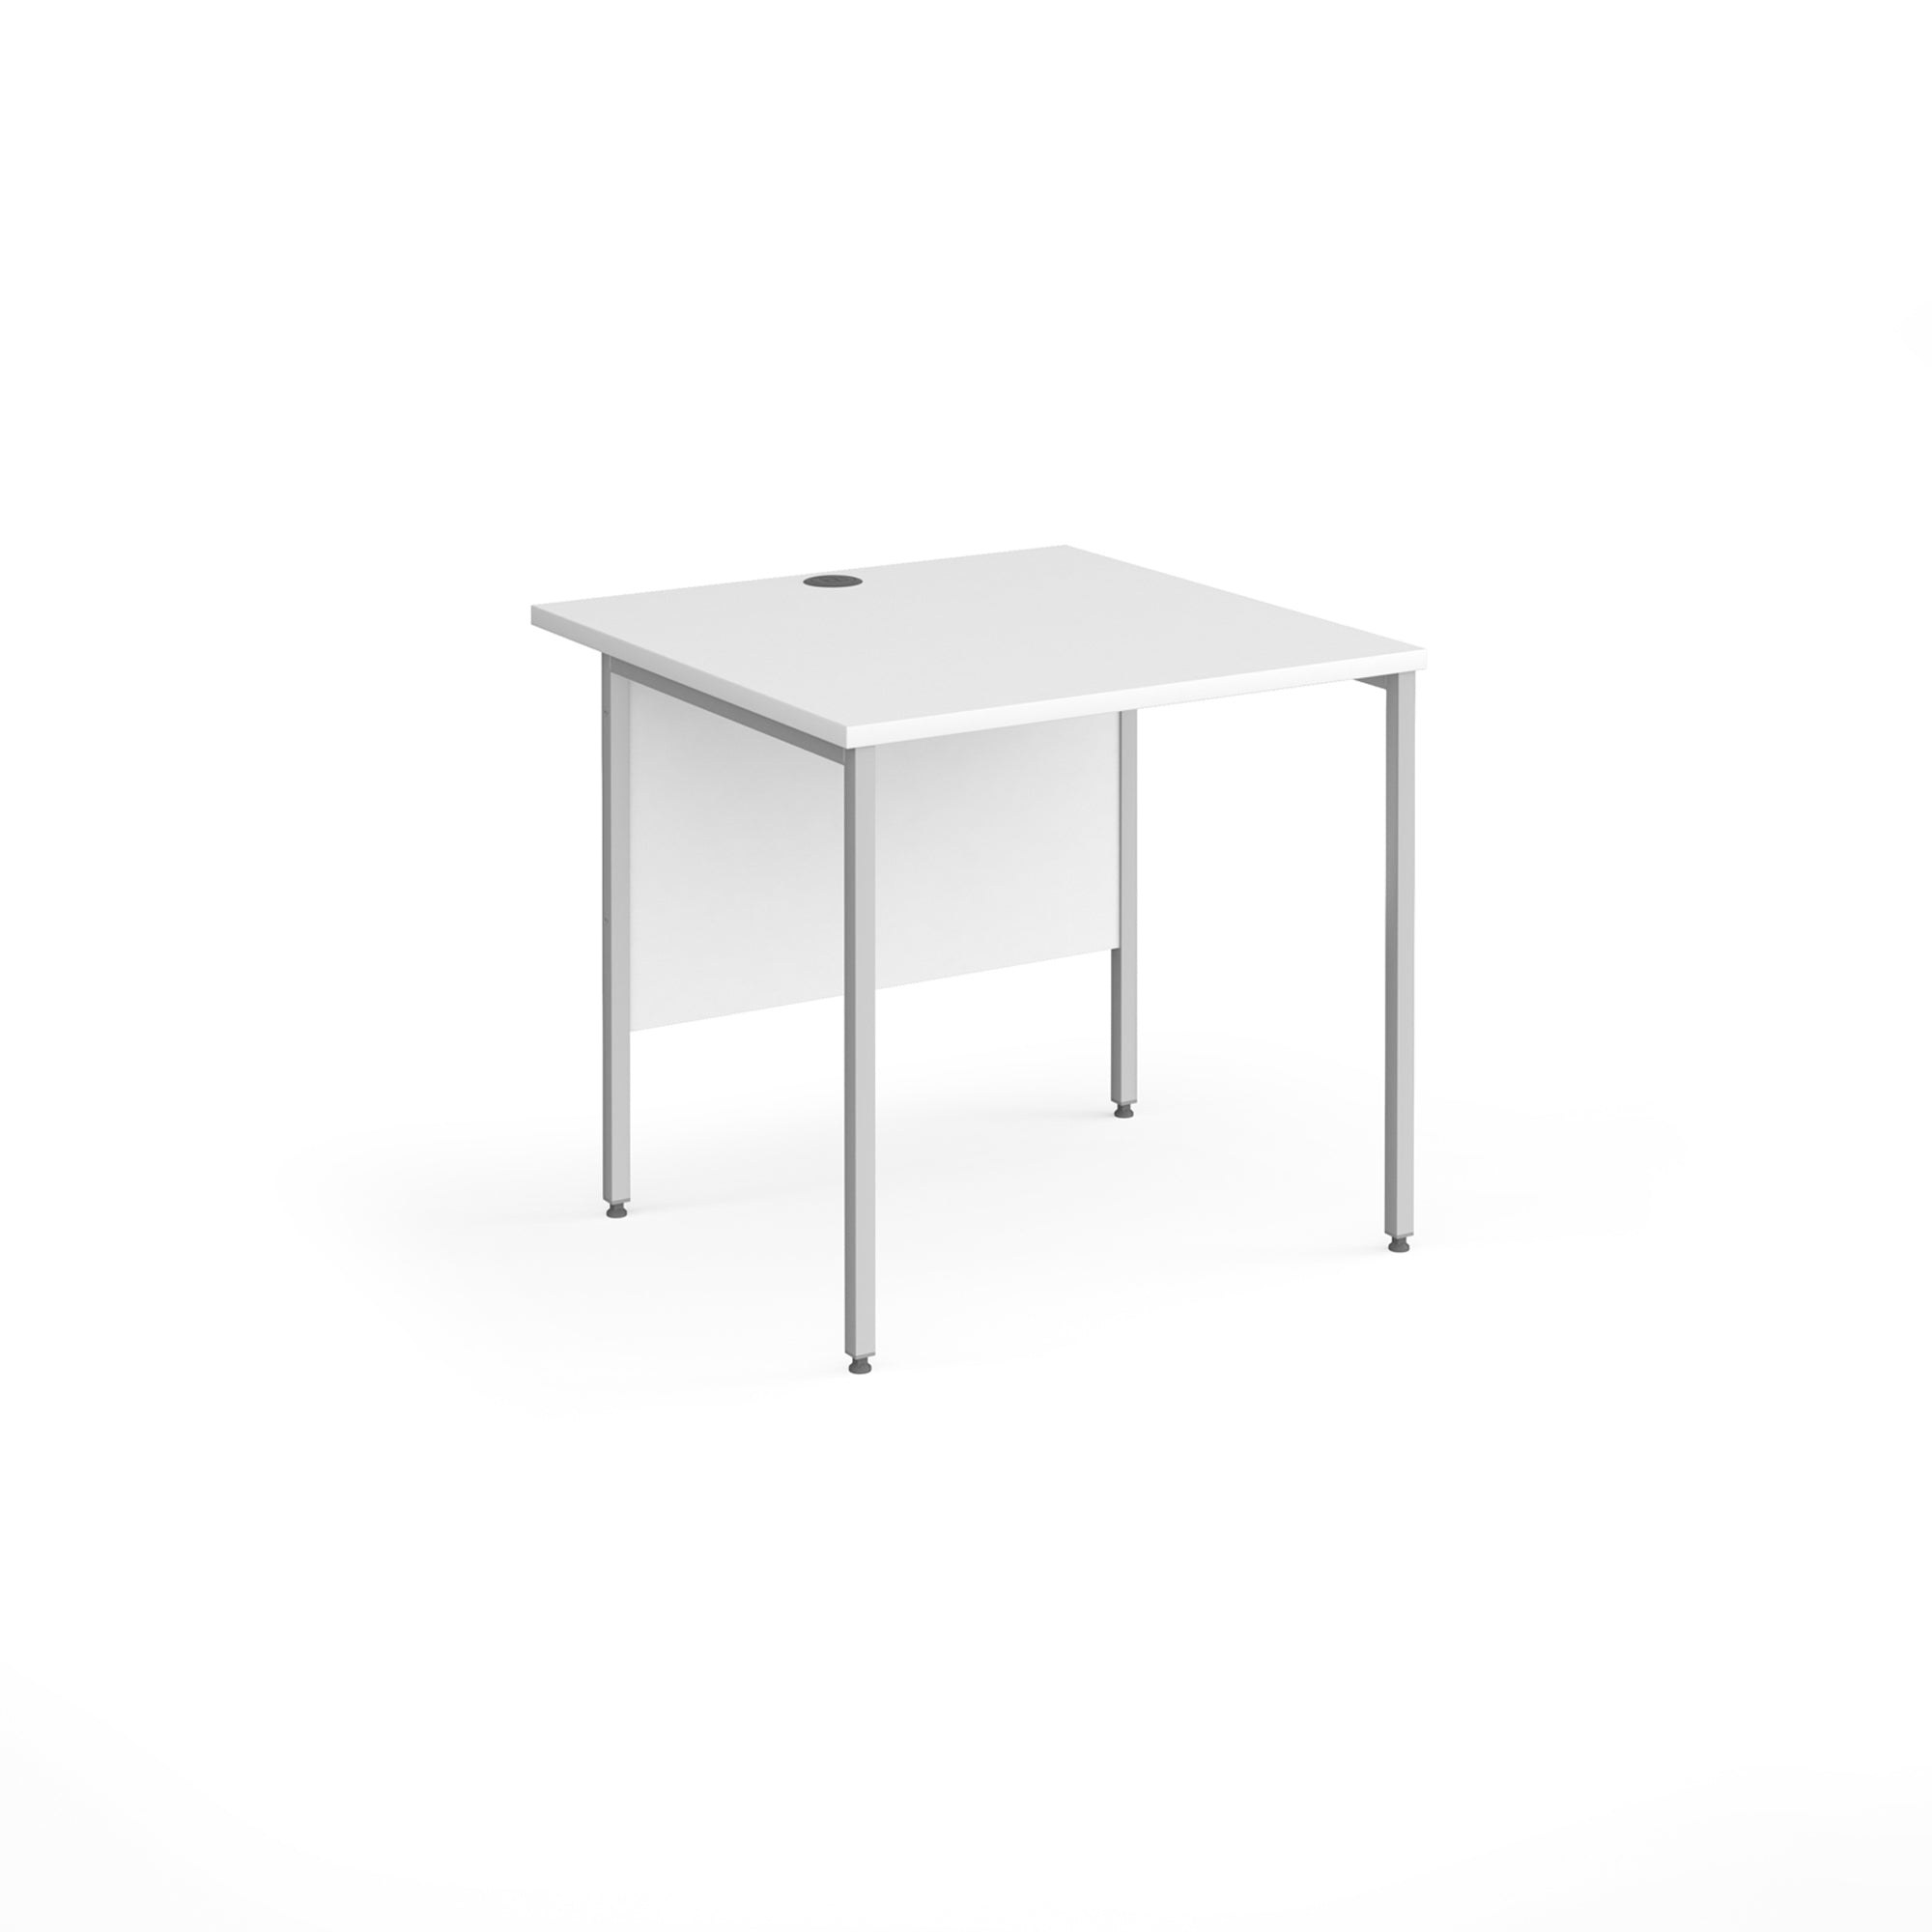 Contract 25 straight desk with H-Frame leg - Office Products Online